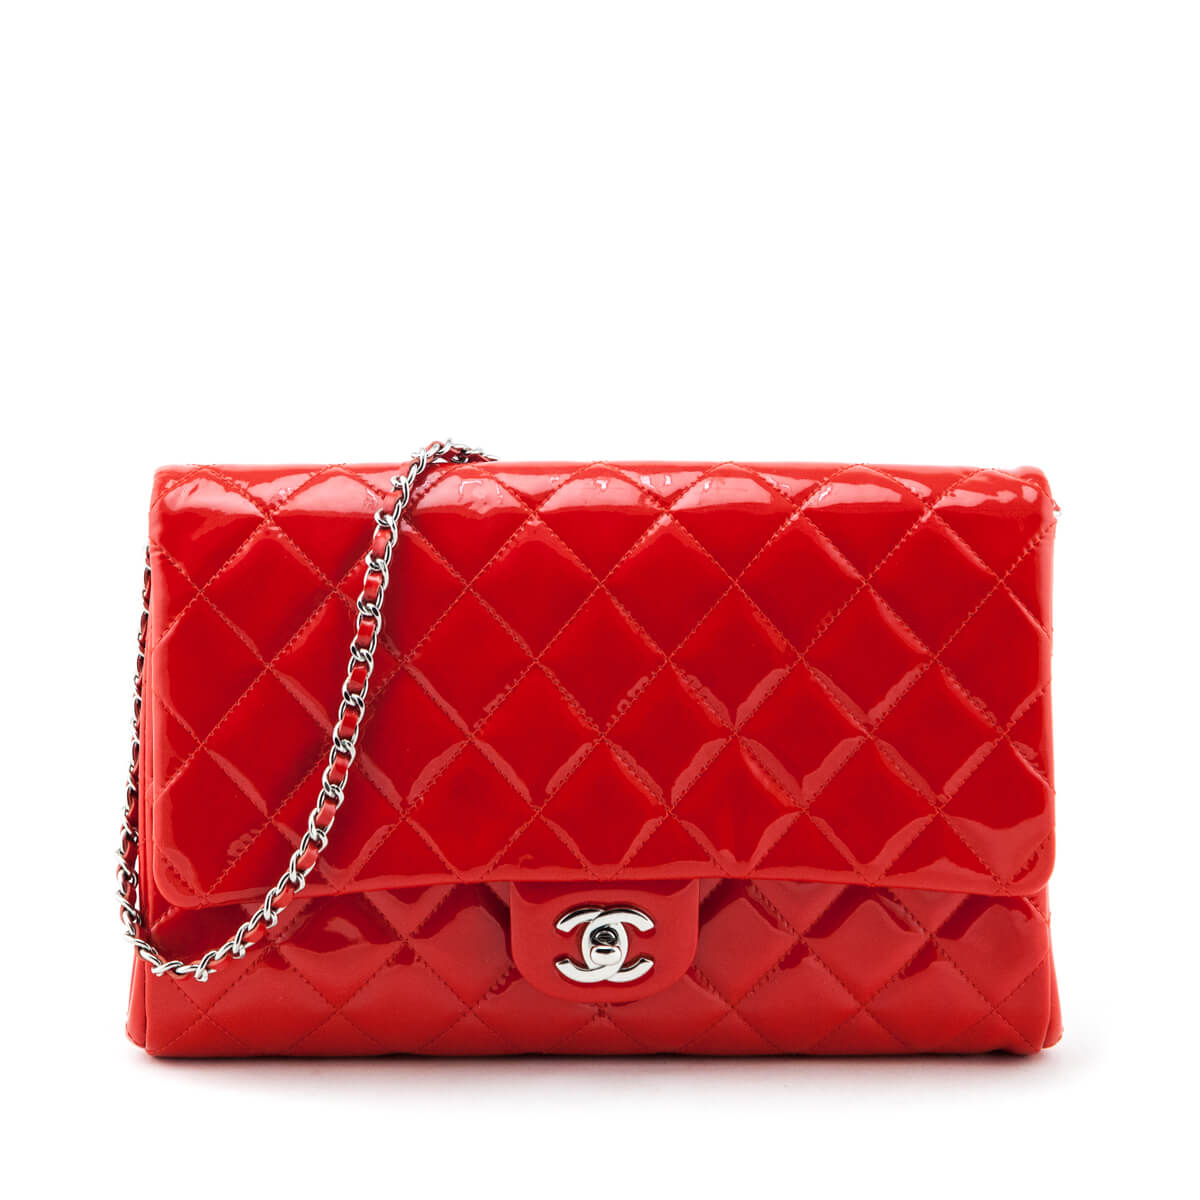 Chanel Red Quilted Patent Leather Chain New Clutch Flap Bag